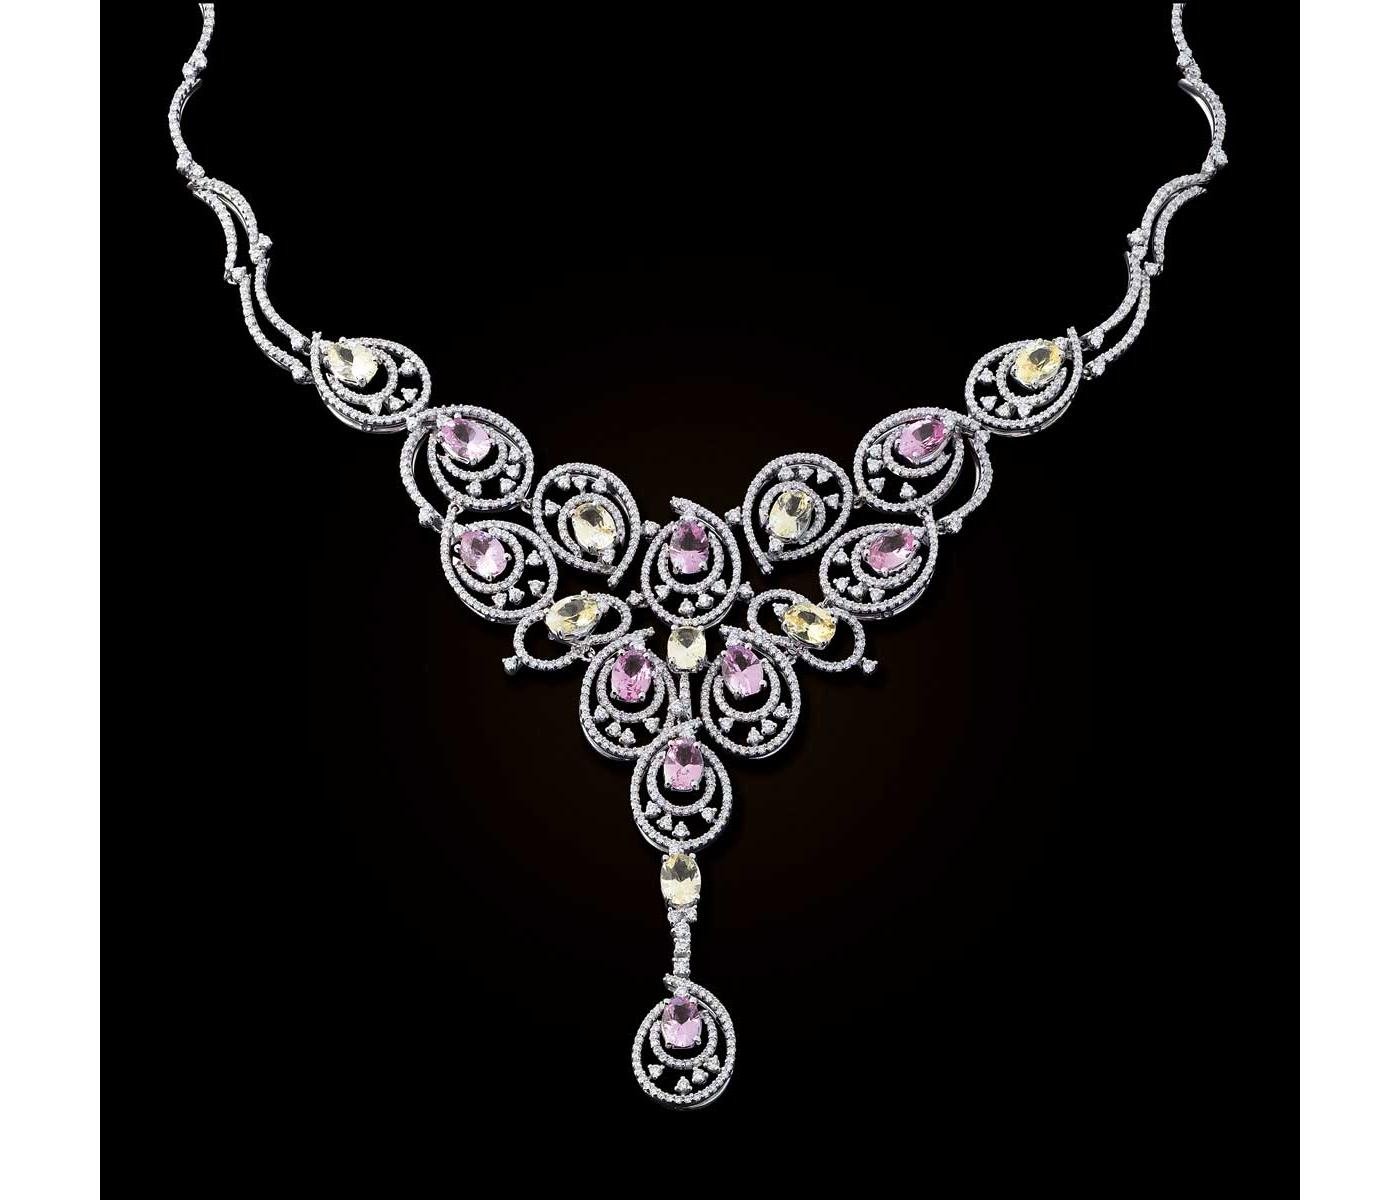 Necklace by Giovanni Ferraris